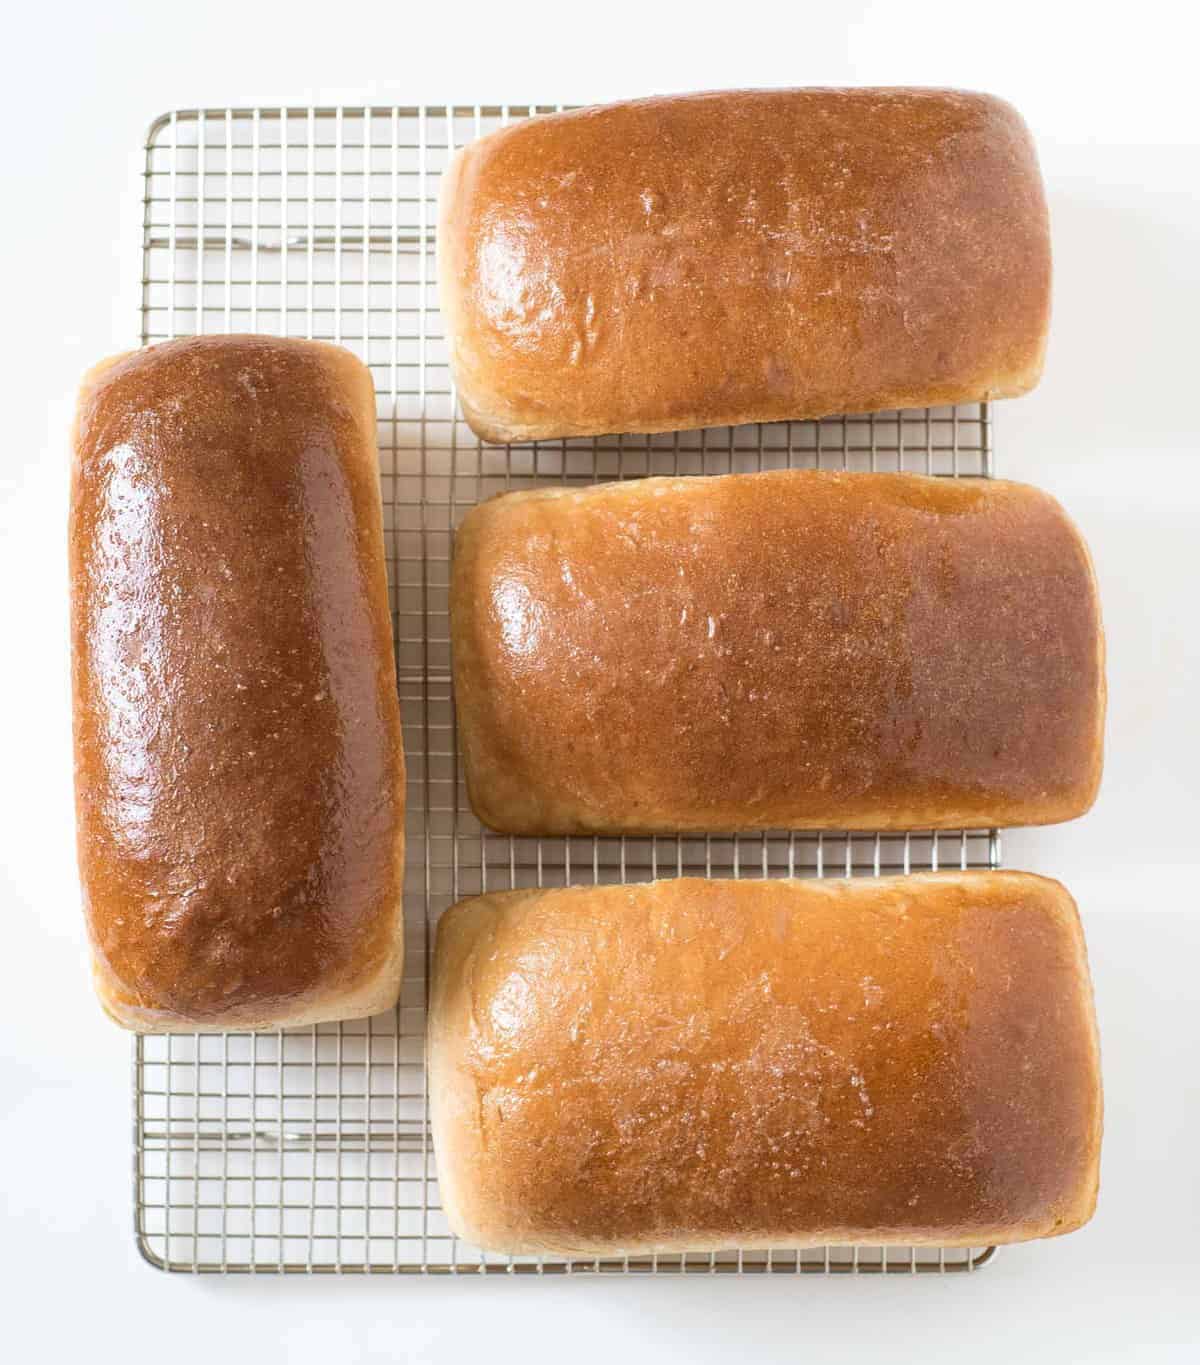 https://www.blessthismessplease.com/wp-content/uploads/2018/02/Moms-Four-Loaf-Wheat-Bread-Recipe-2.jpg